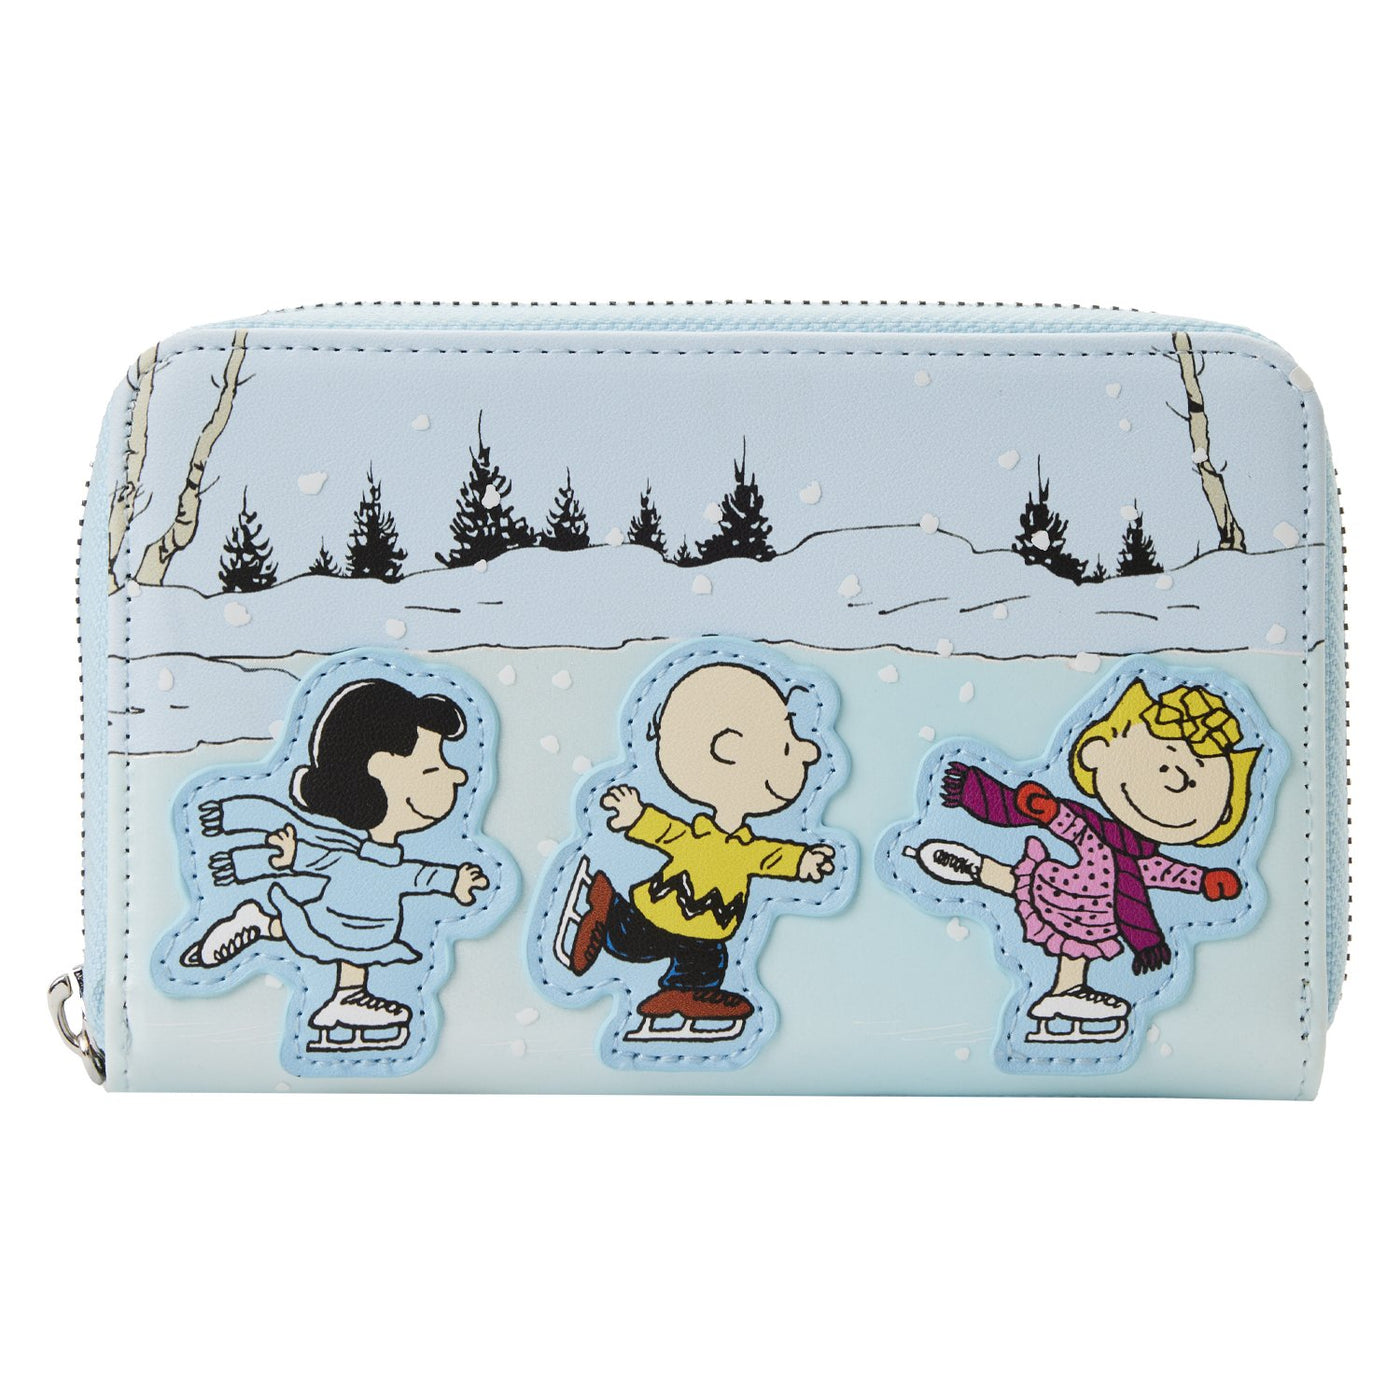 Loungefly Peanuts Charlie Brown Ice Skating Zip-Around Wallet - Front